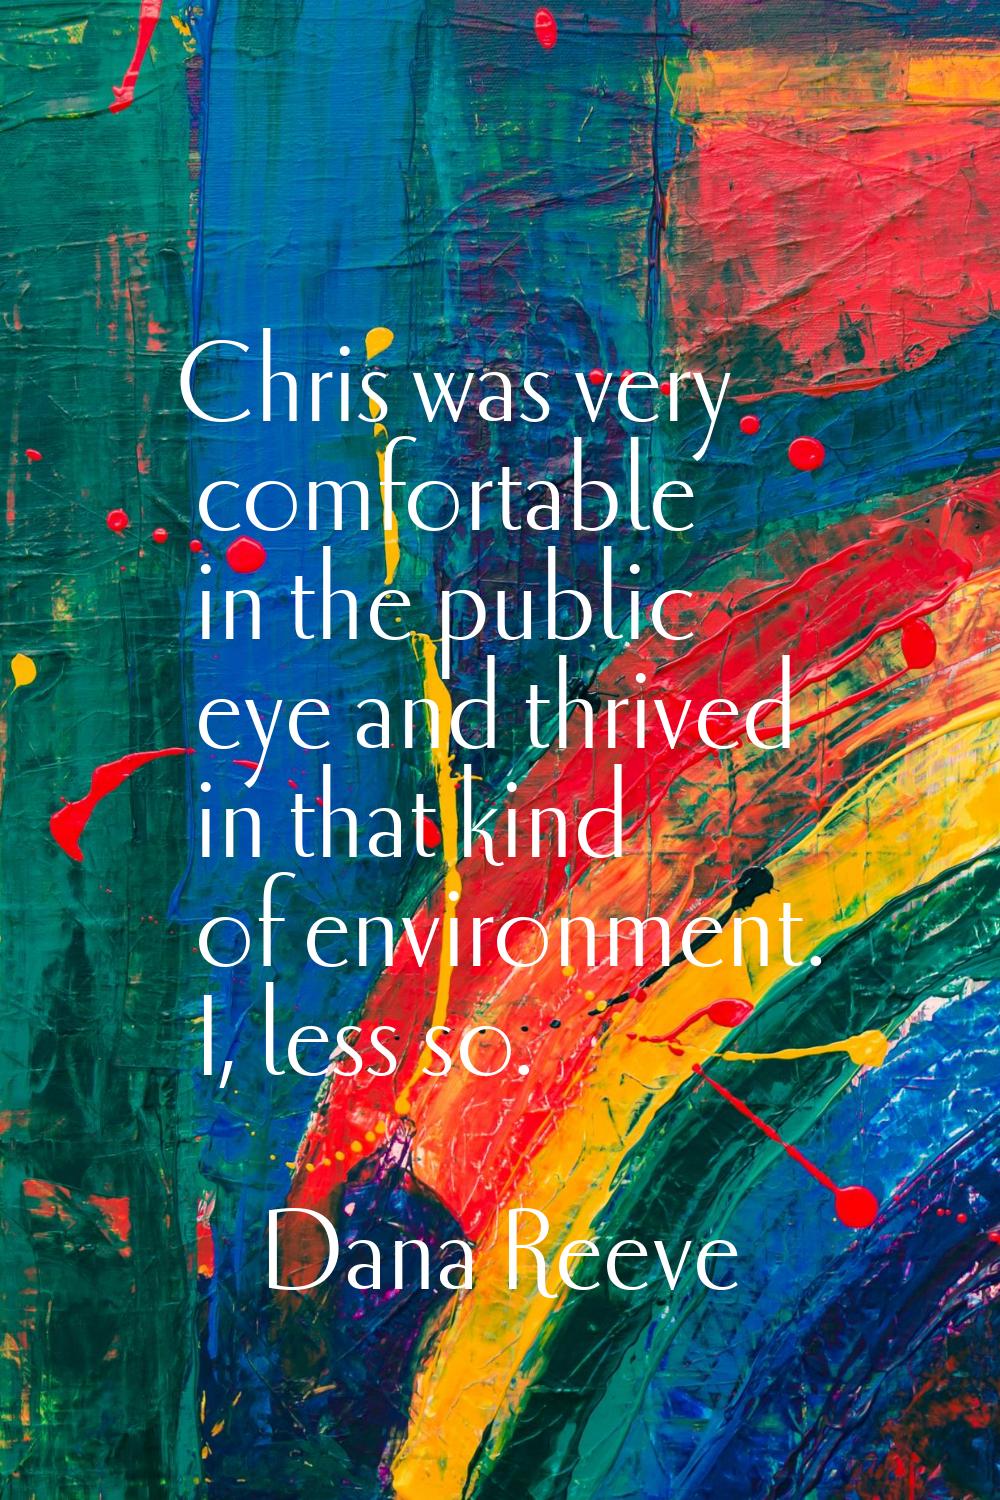 Chris was very comfortable in the public eye and thrived in that kind of environment. I, less so.